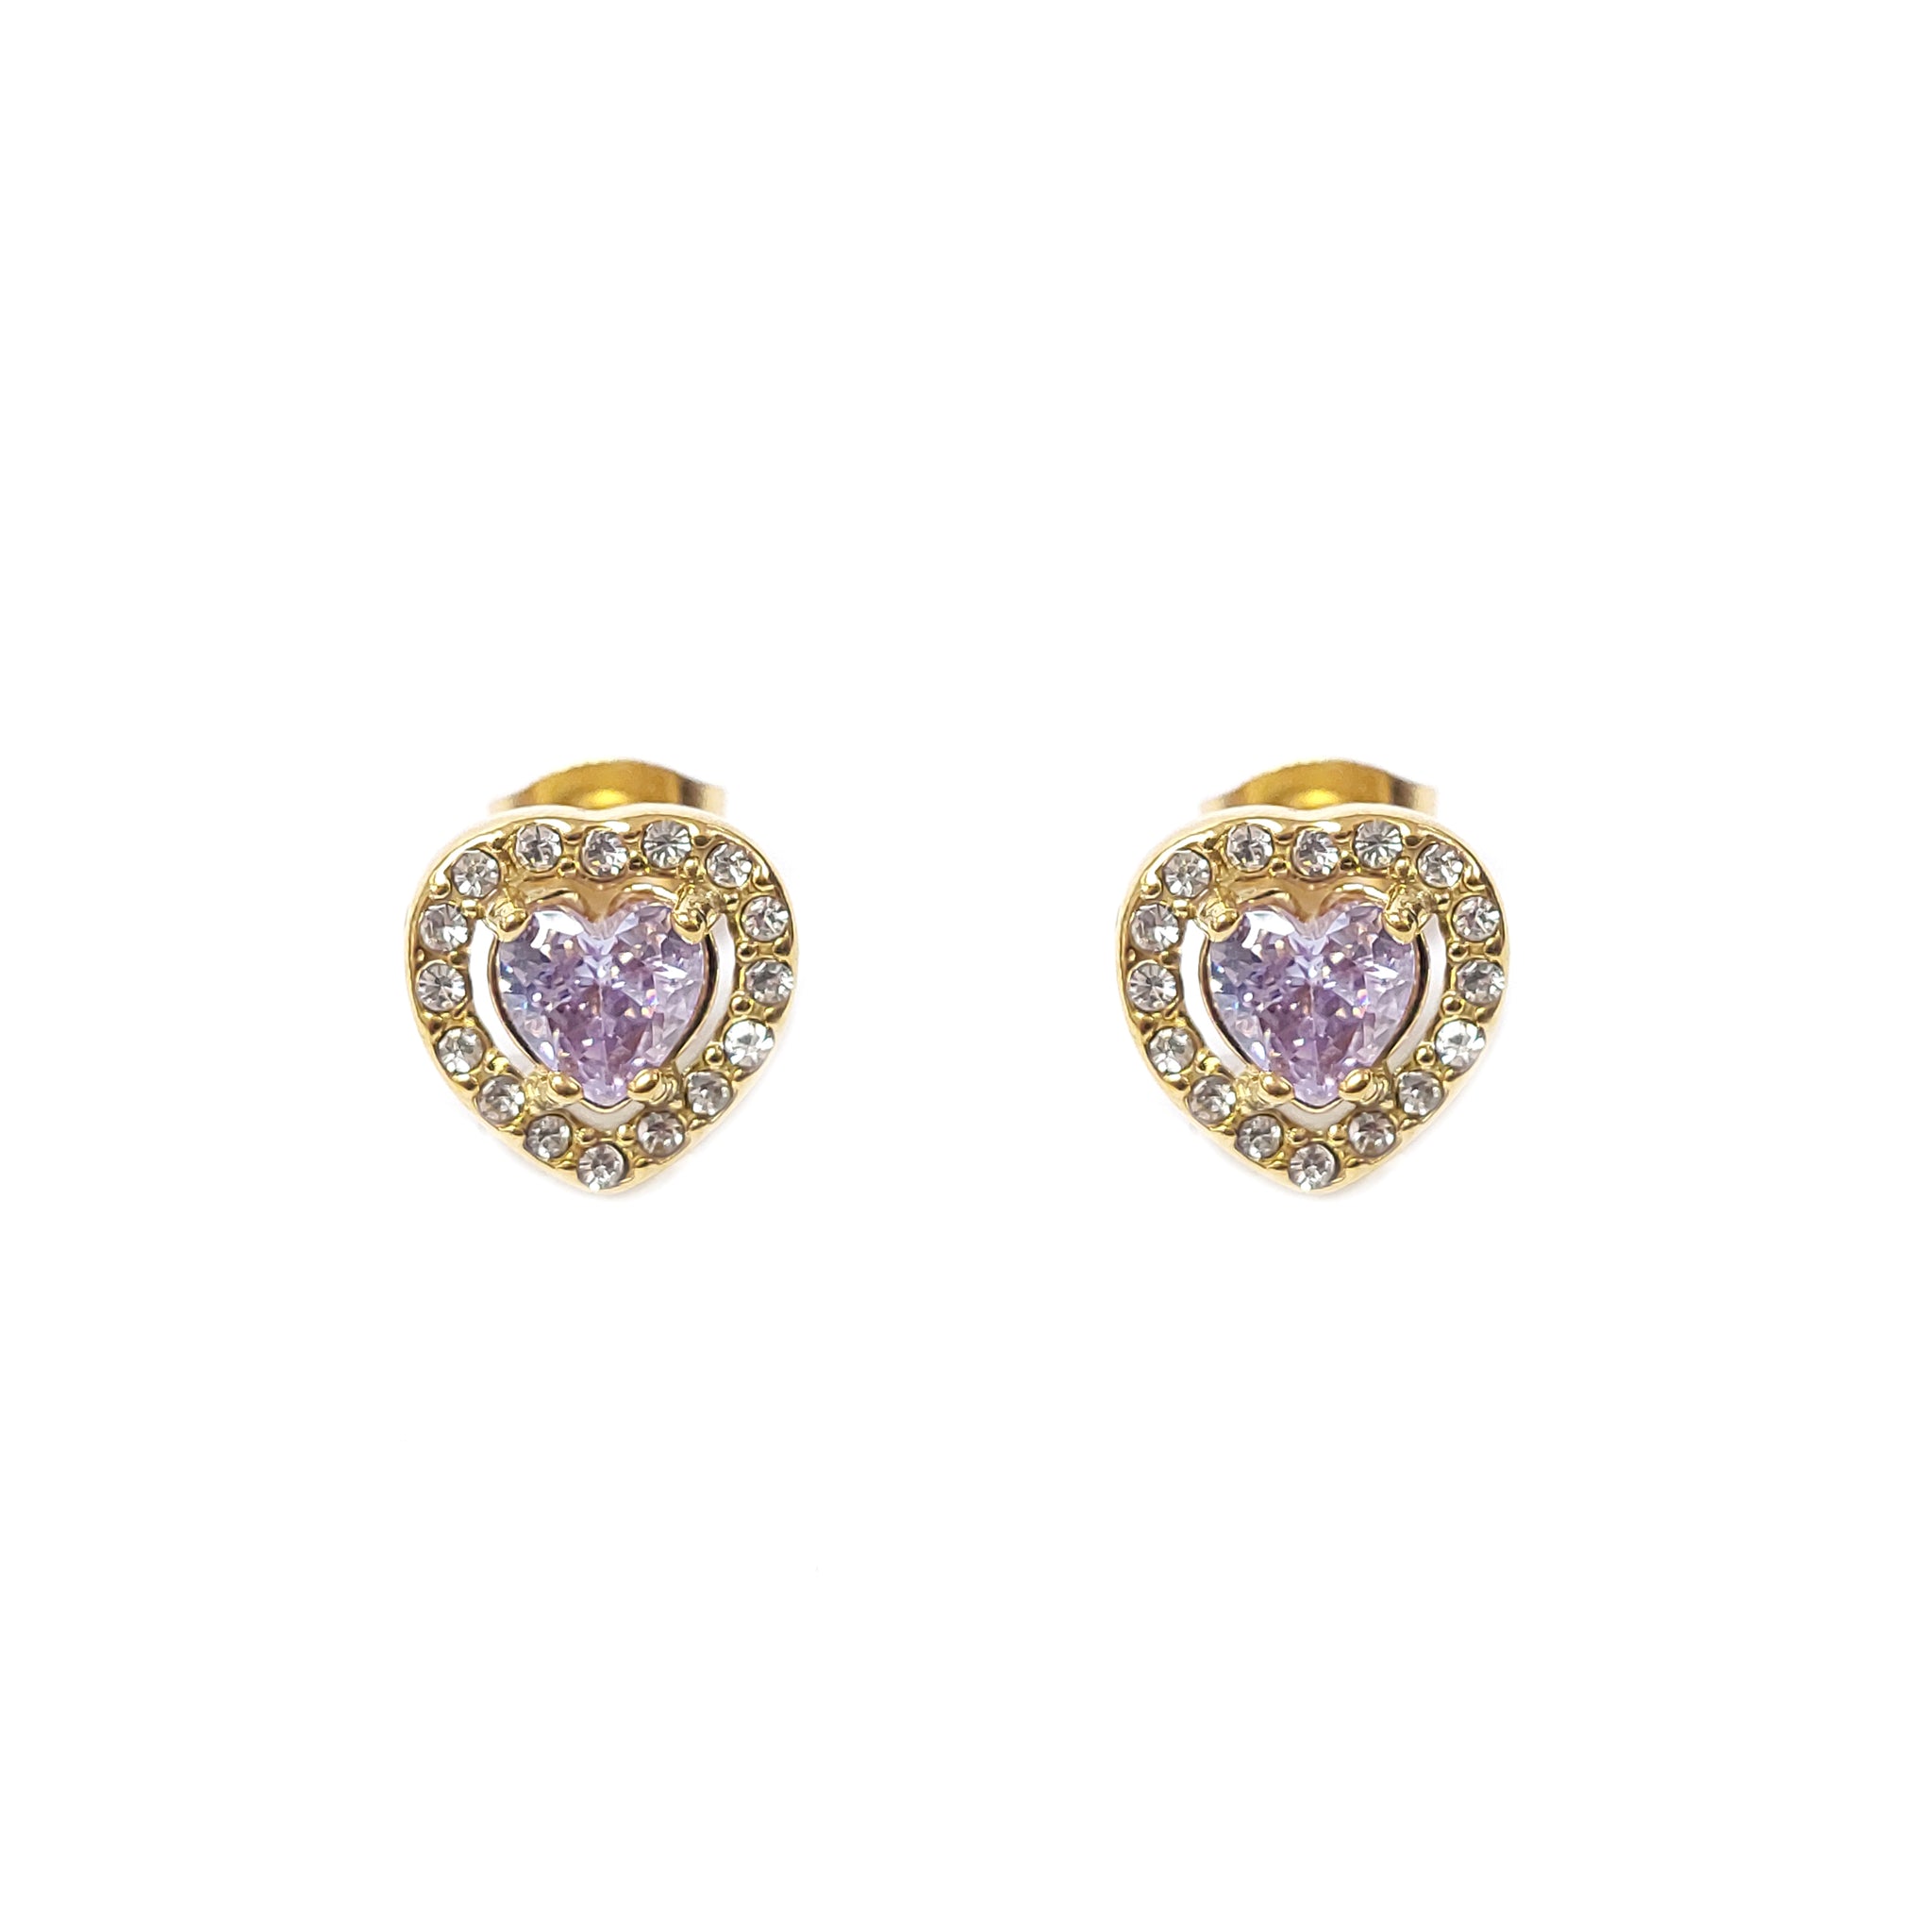 ESE 7928: All IPG Enclosed Cz-Studded Light Purple Heart Cz Earrings